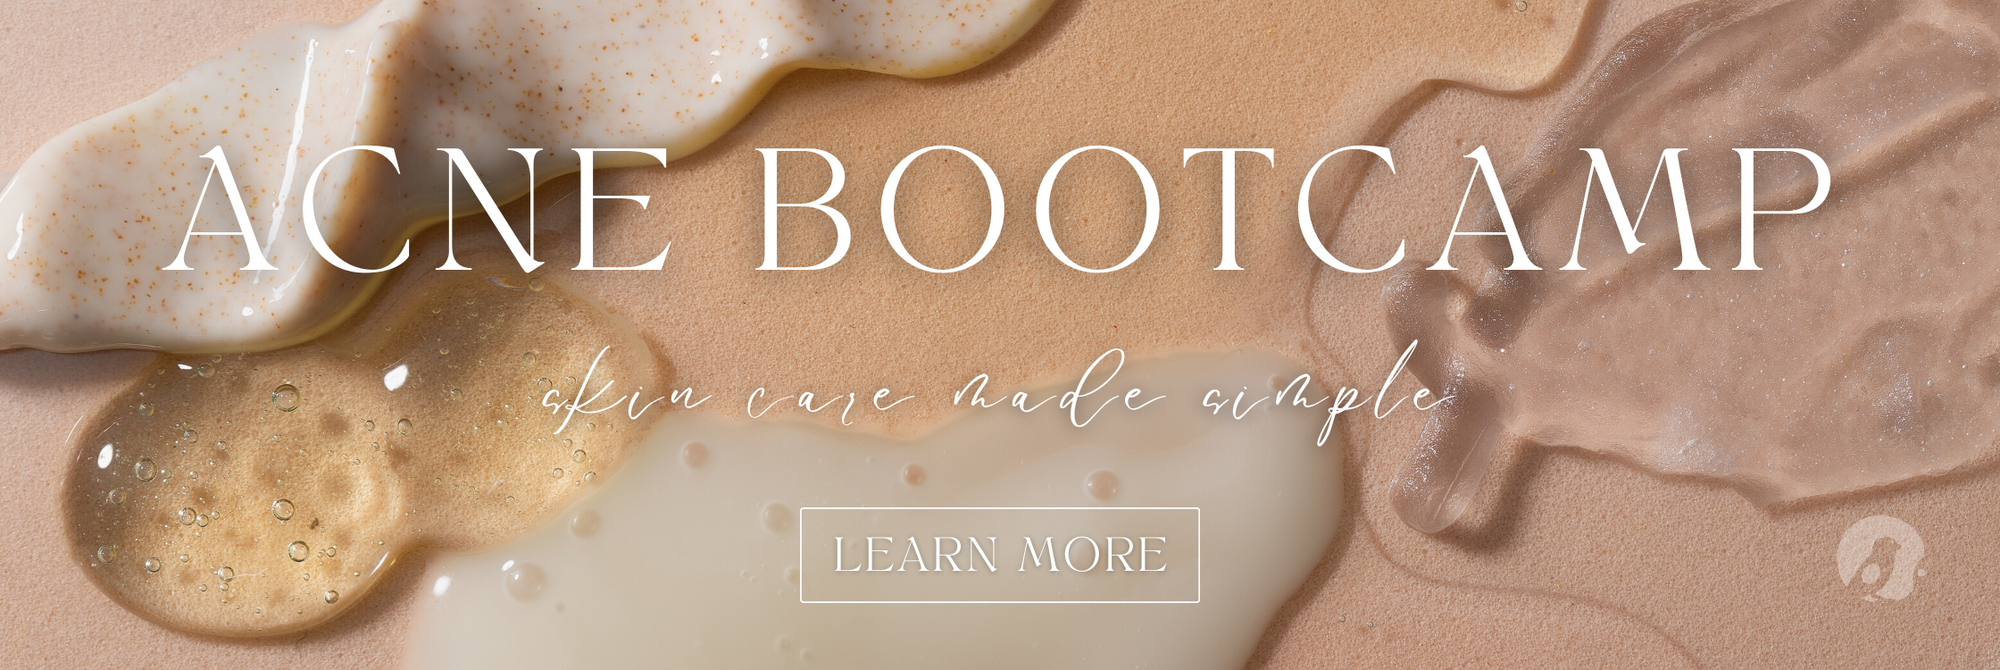 Acne Bootcamp - Skin care made simple - Learn more here